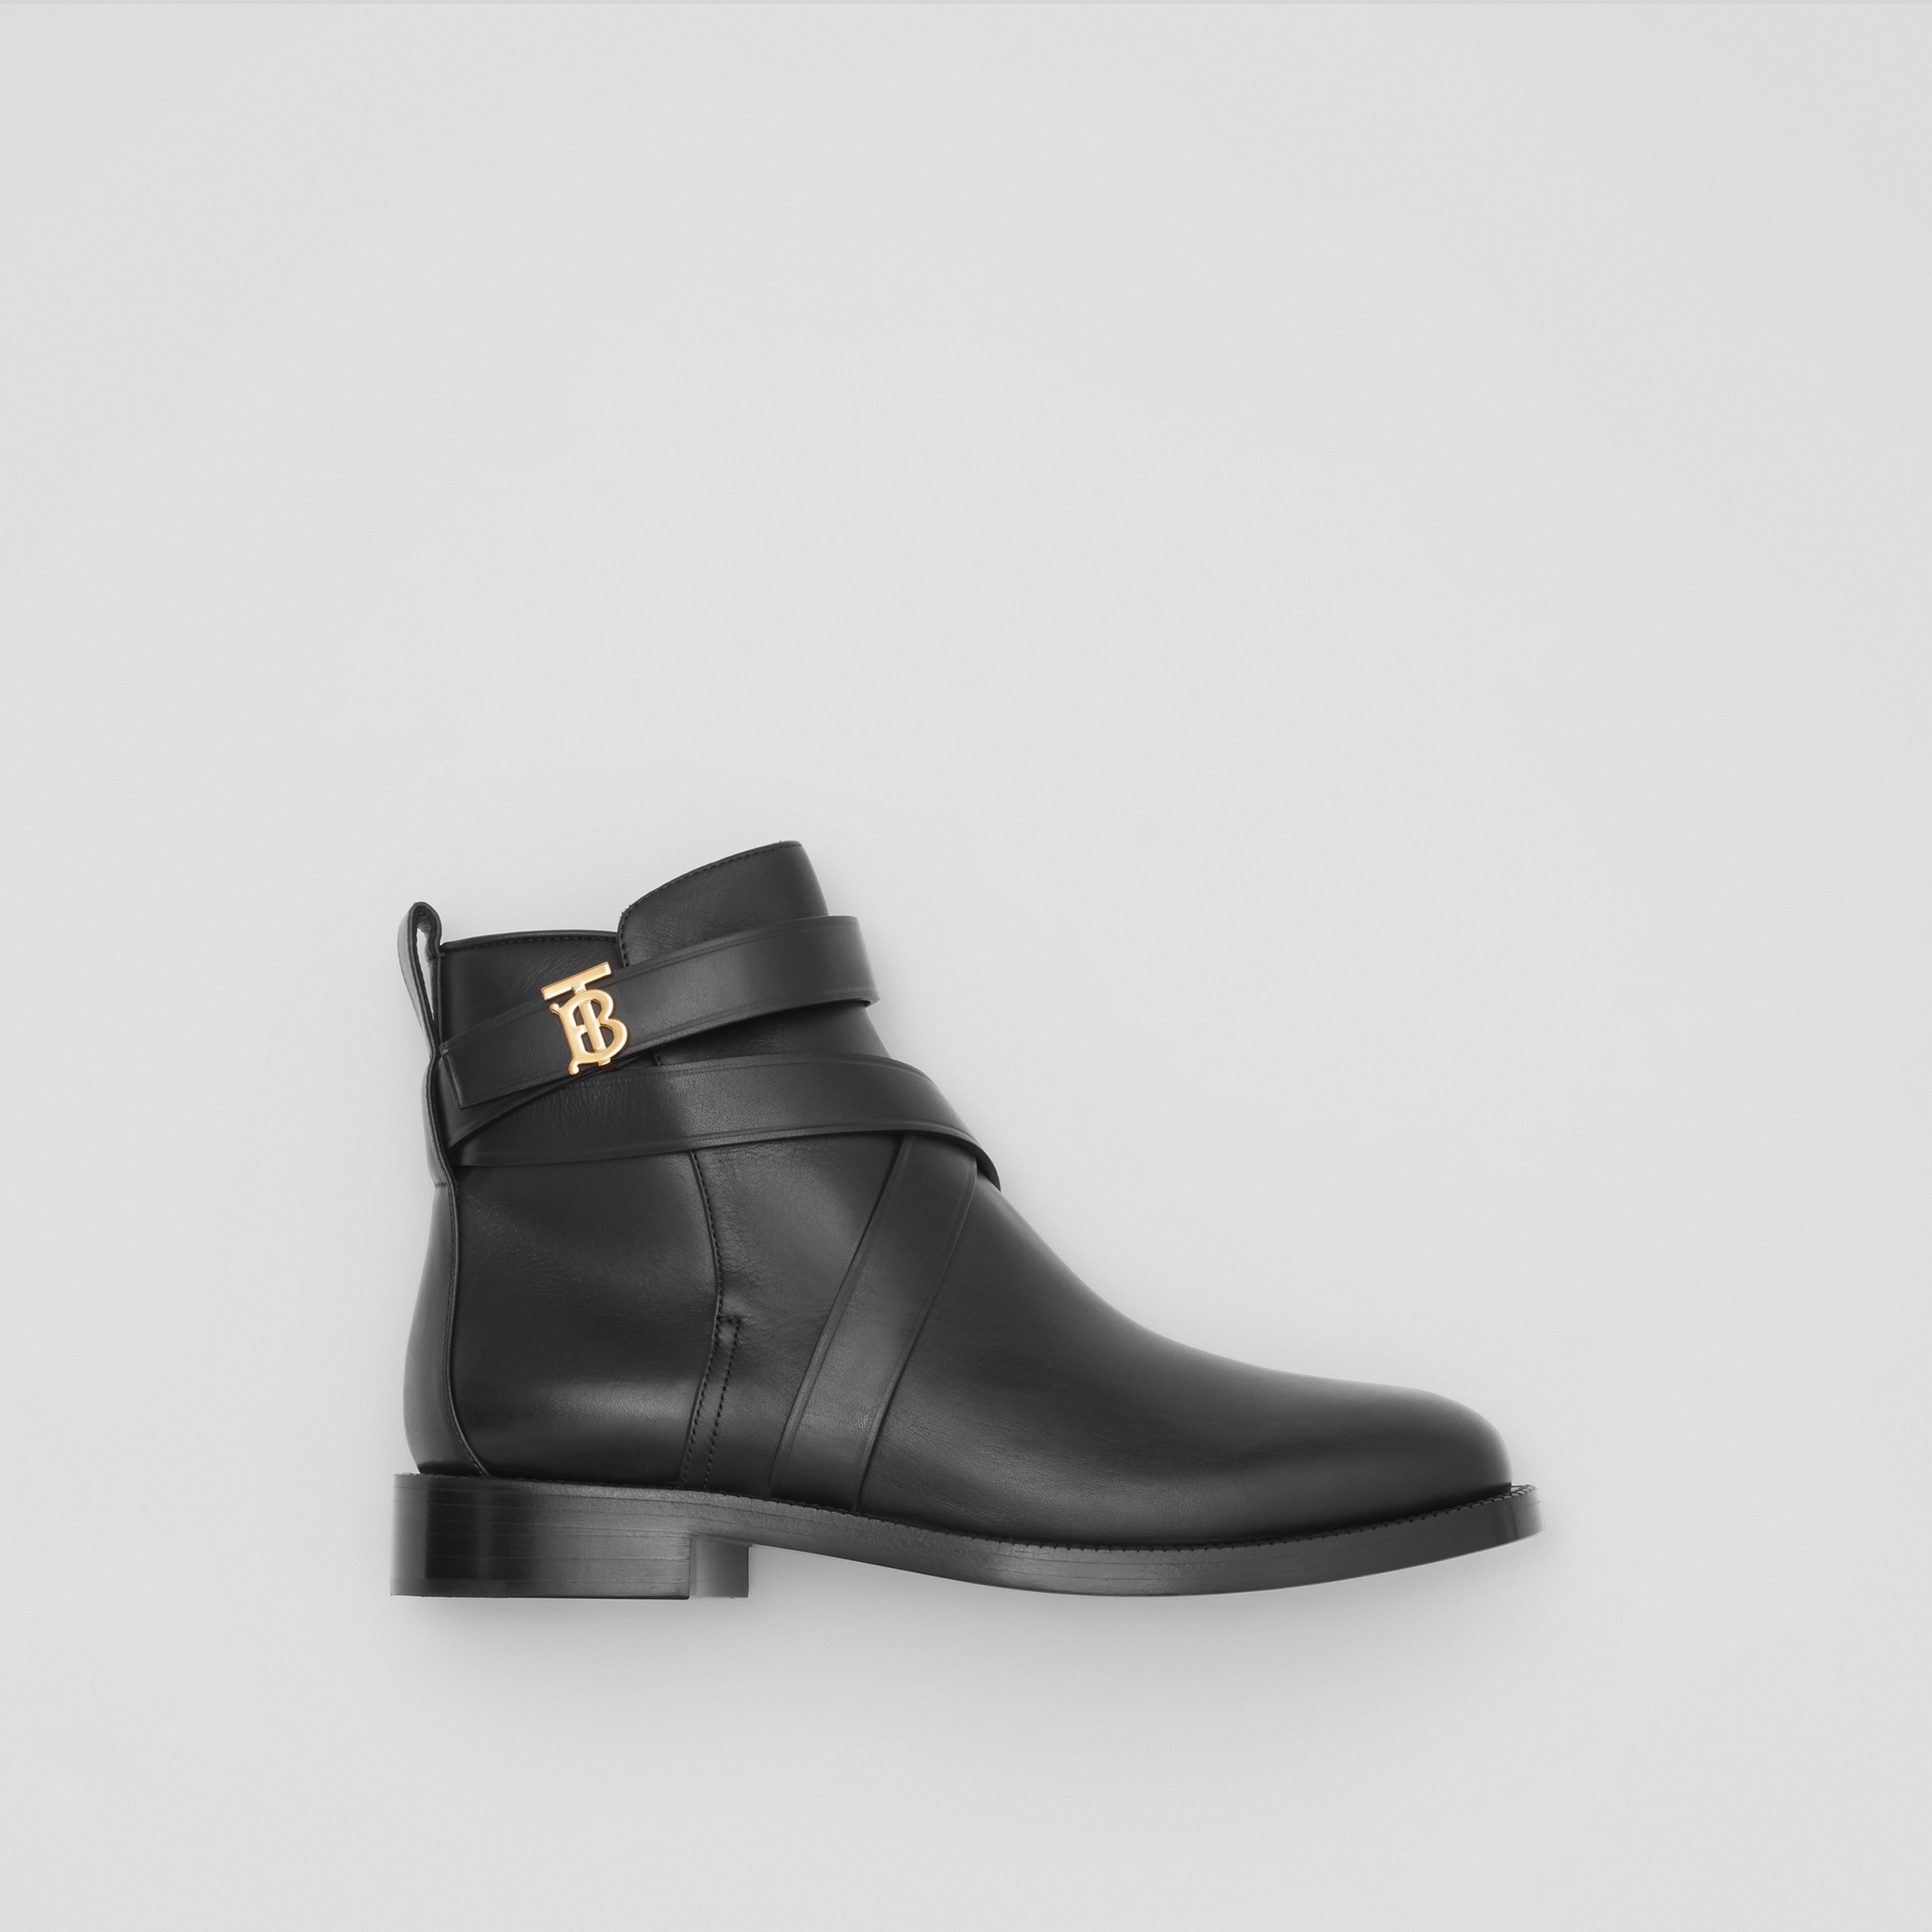 Monogram Motif Leather Ankle Boots in Black - Women | Burberry United ...